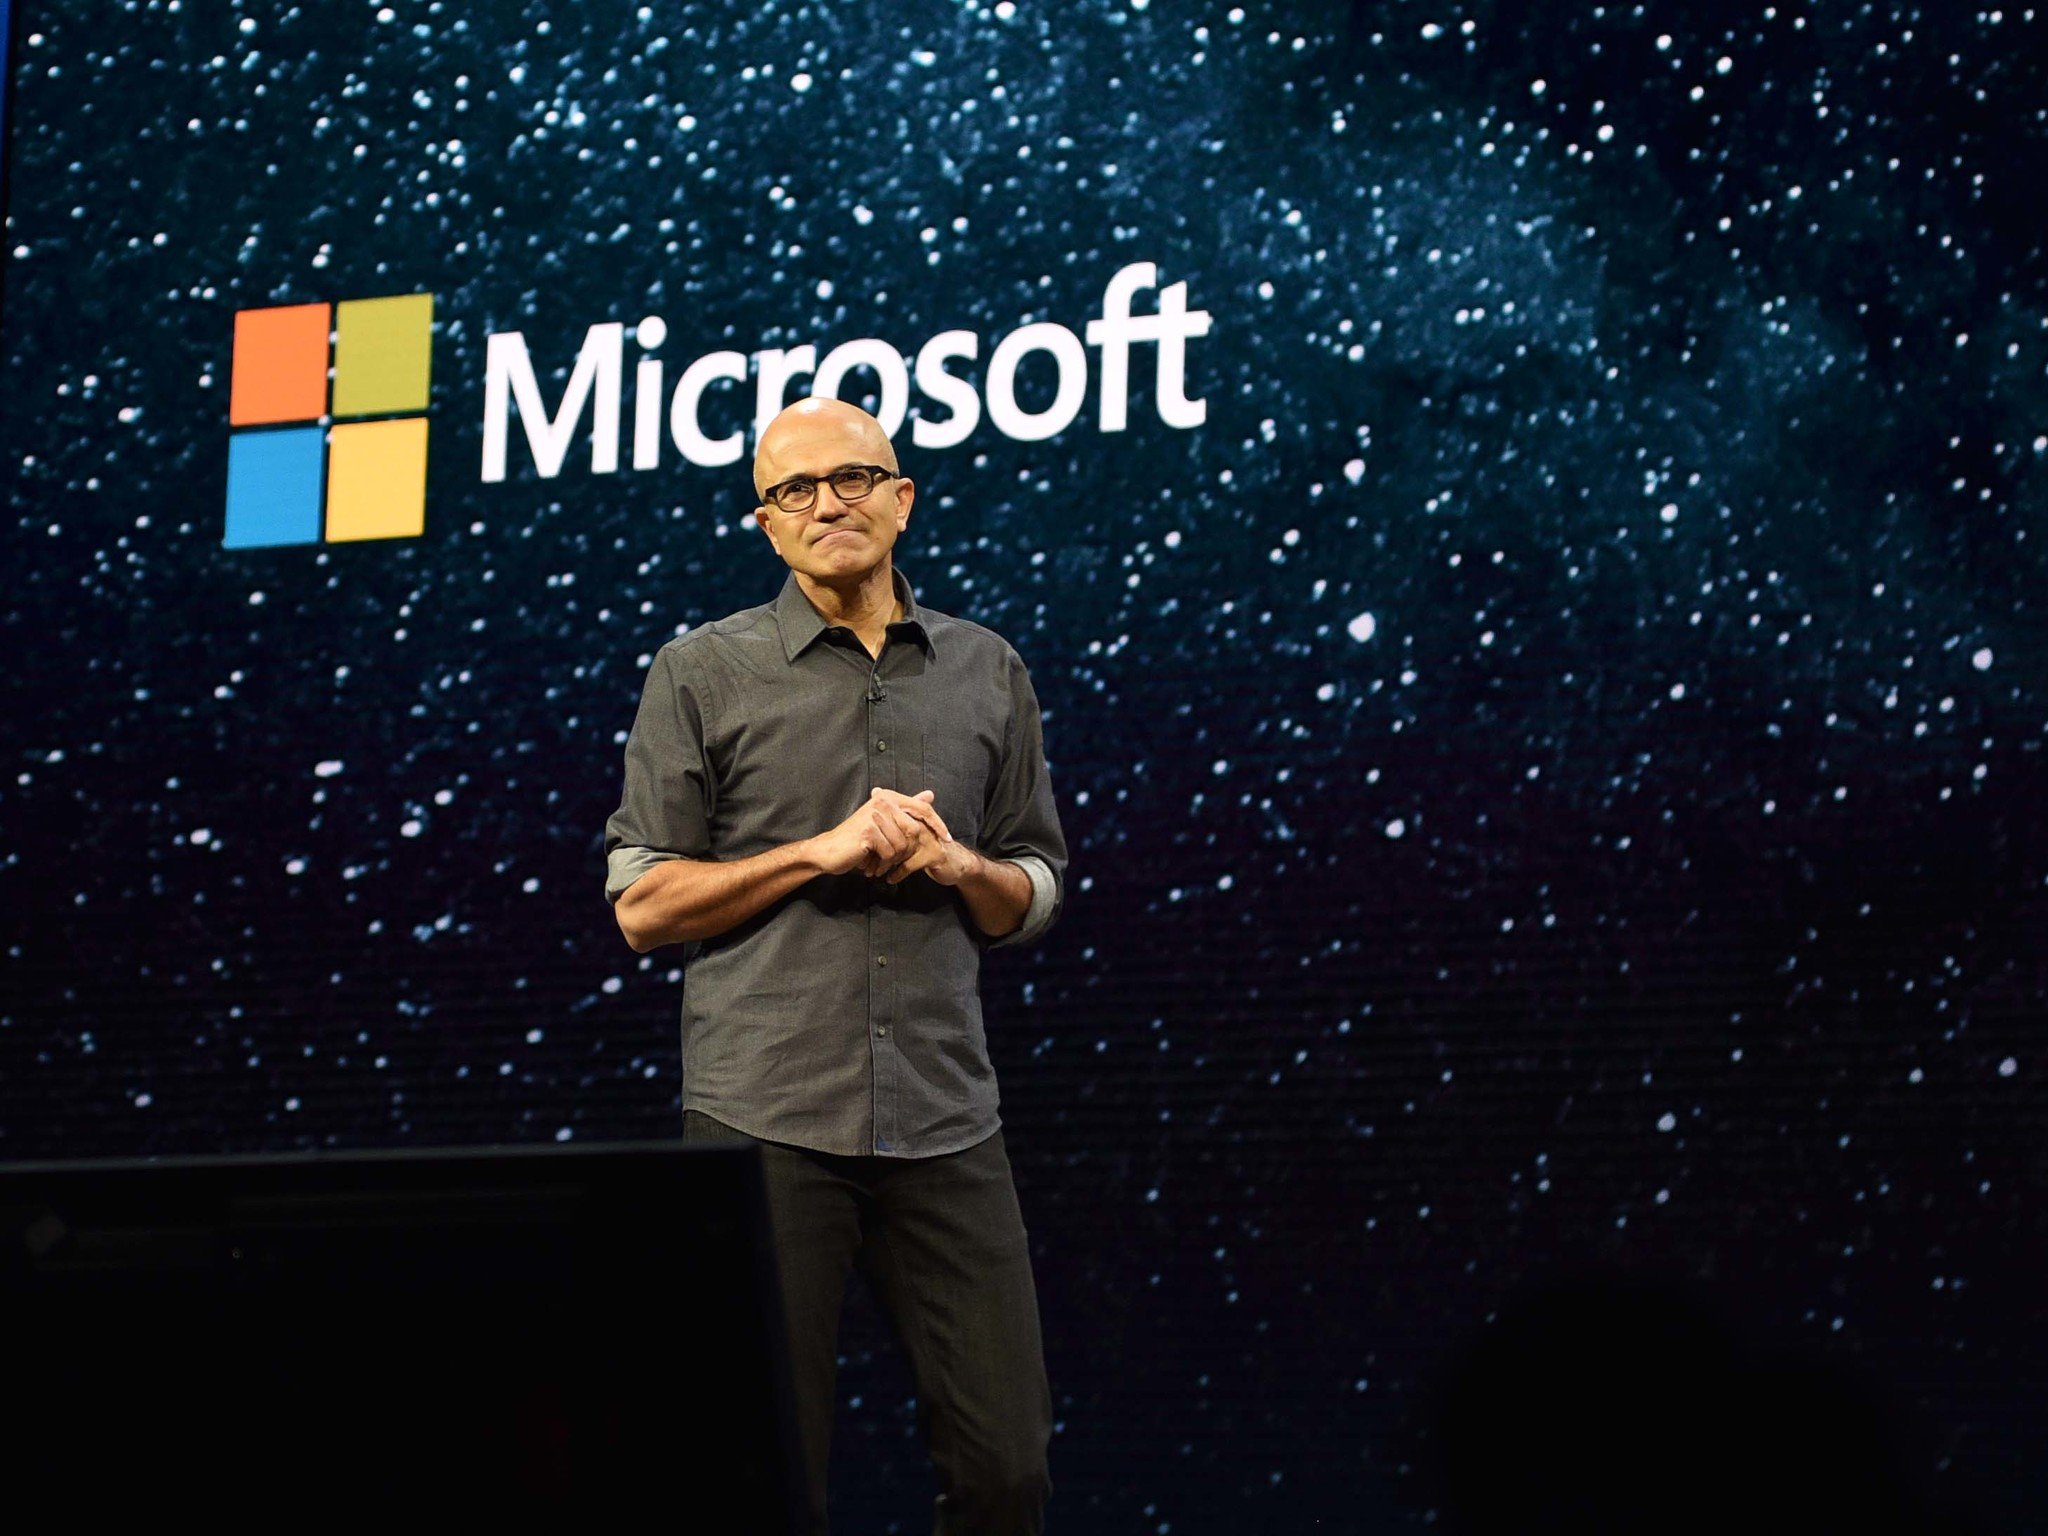 Microsoft set to report earnings after the bell